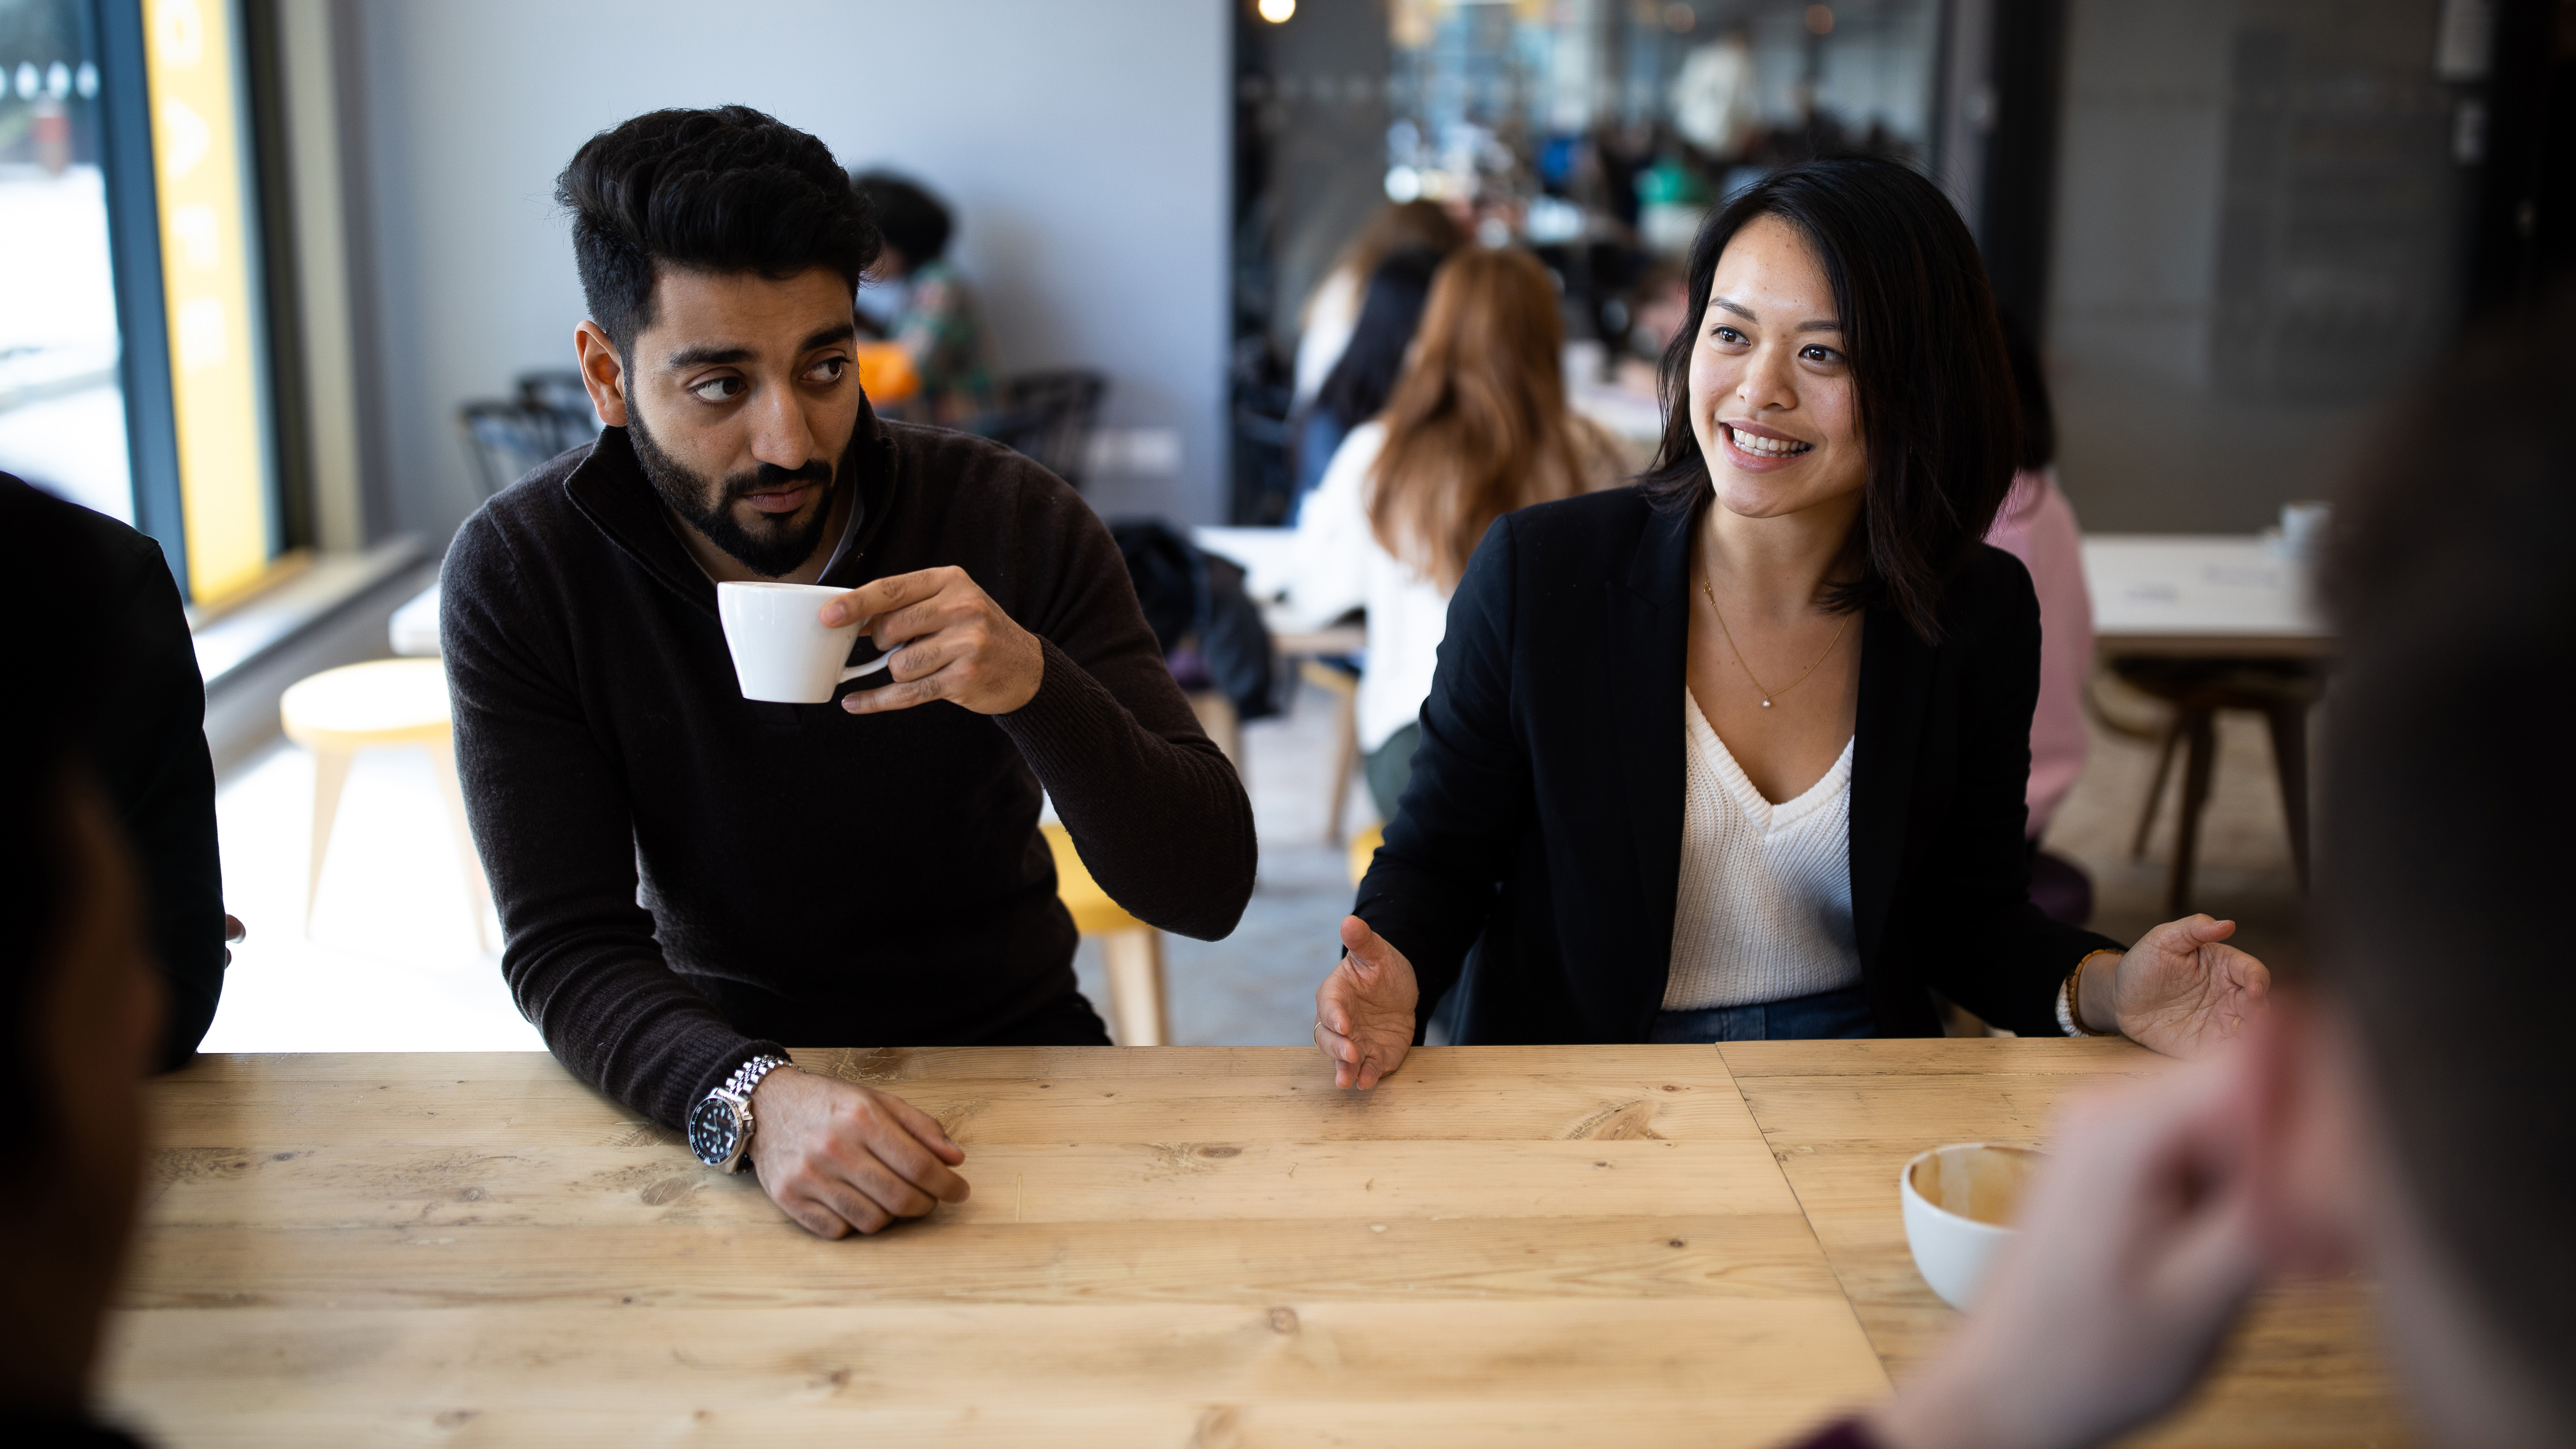 A man and woman having coffee with friends in a cafe